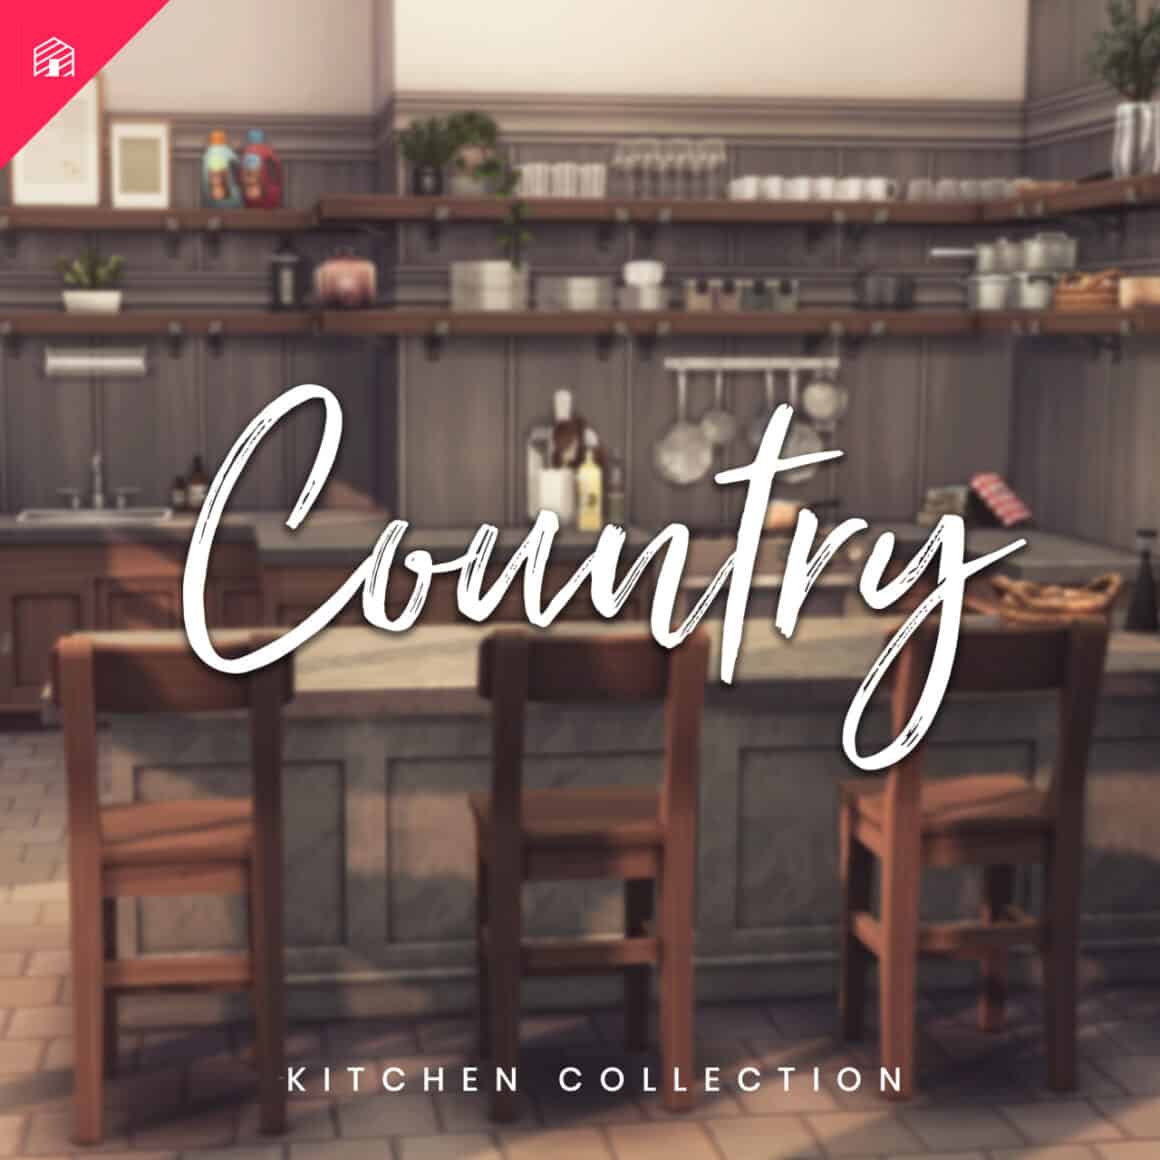 The Country Collection